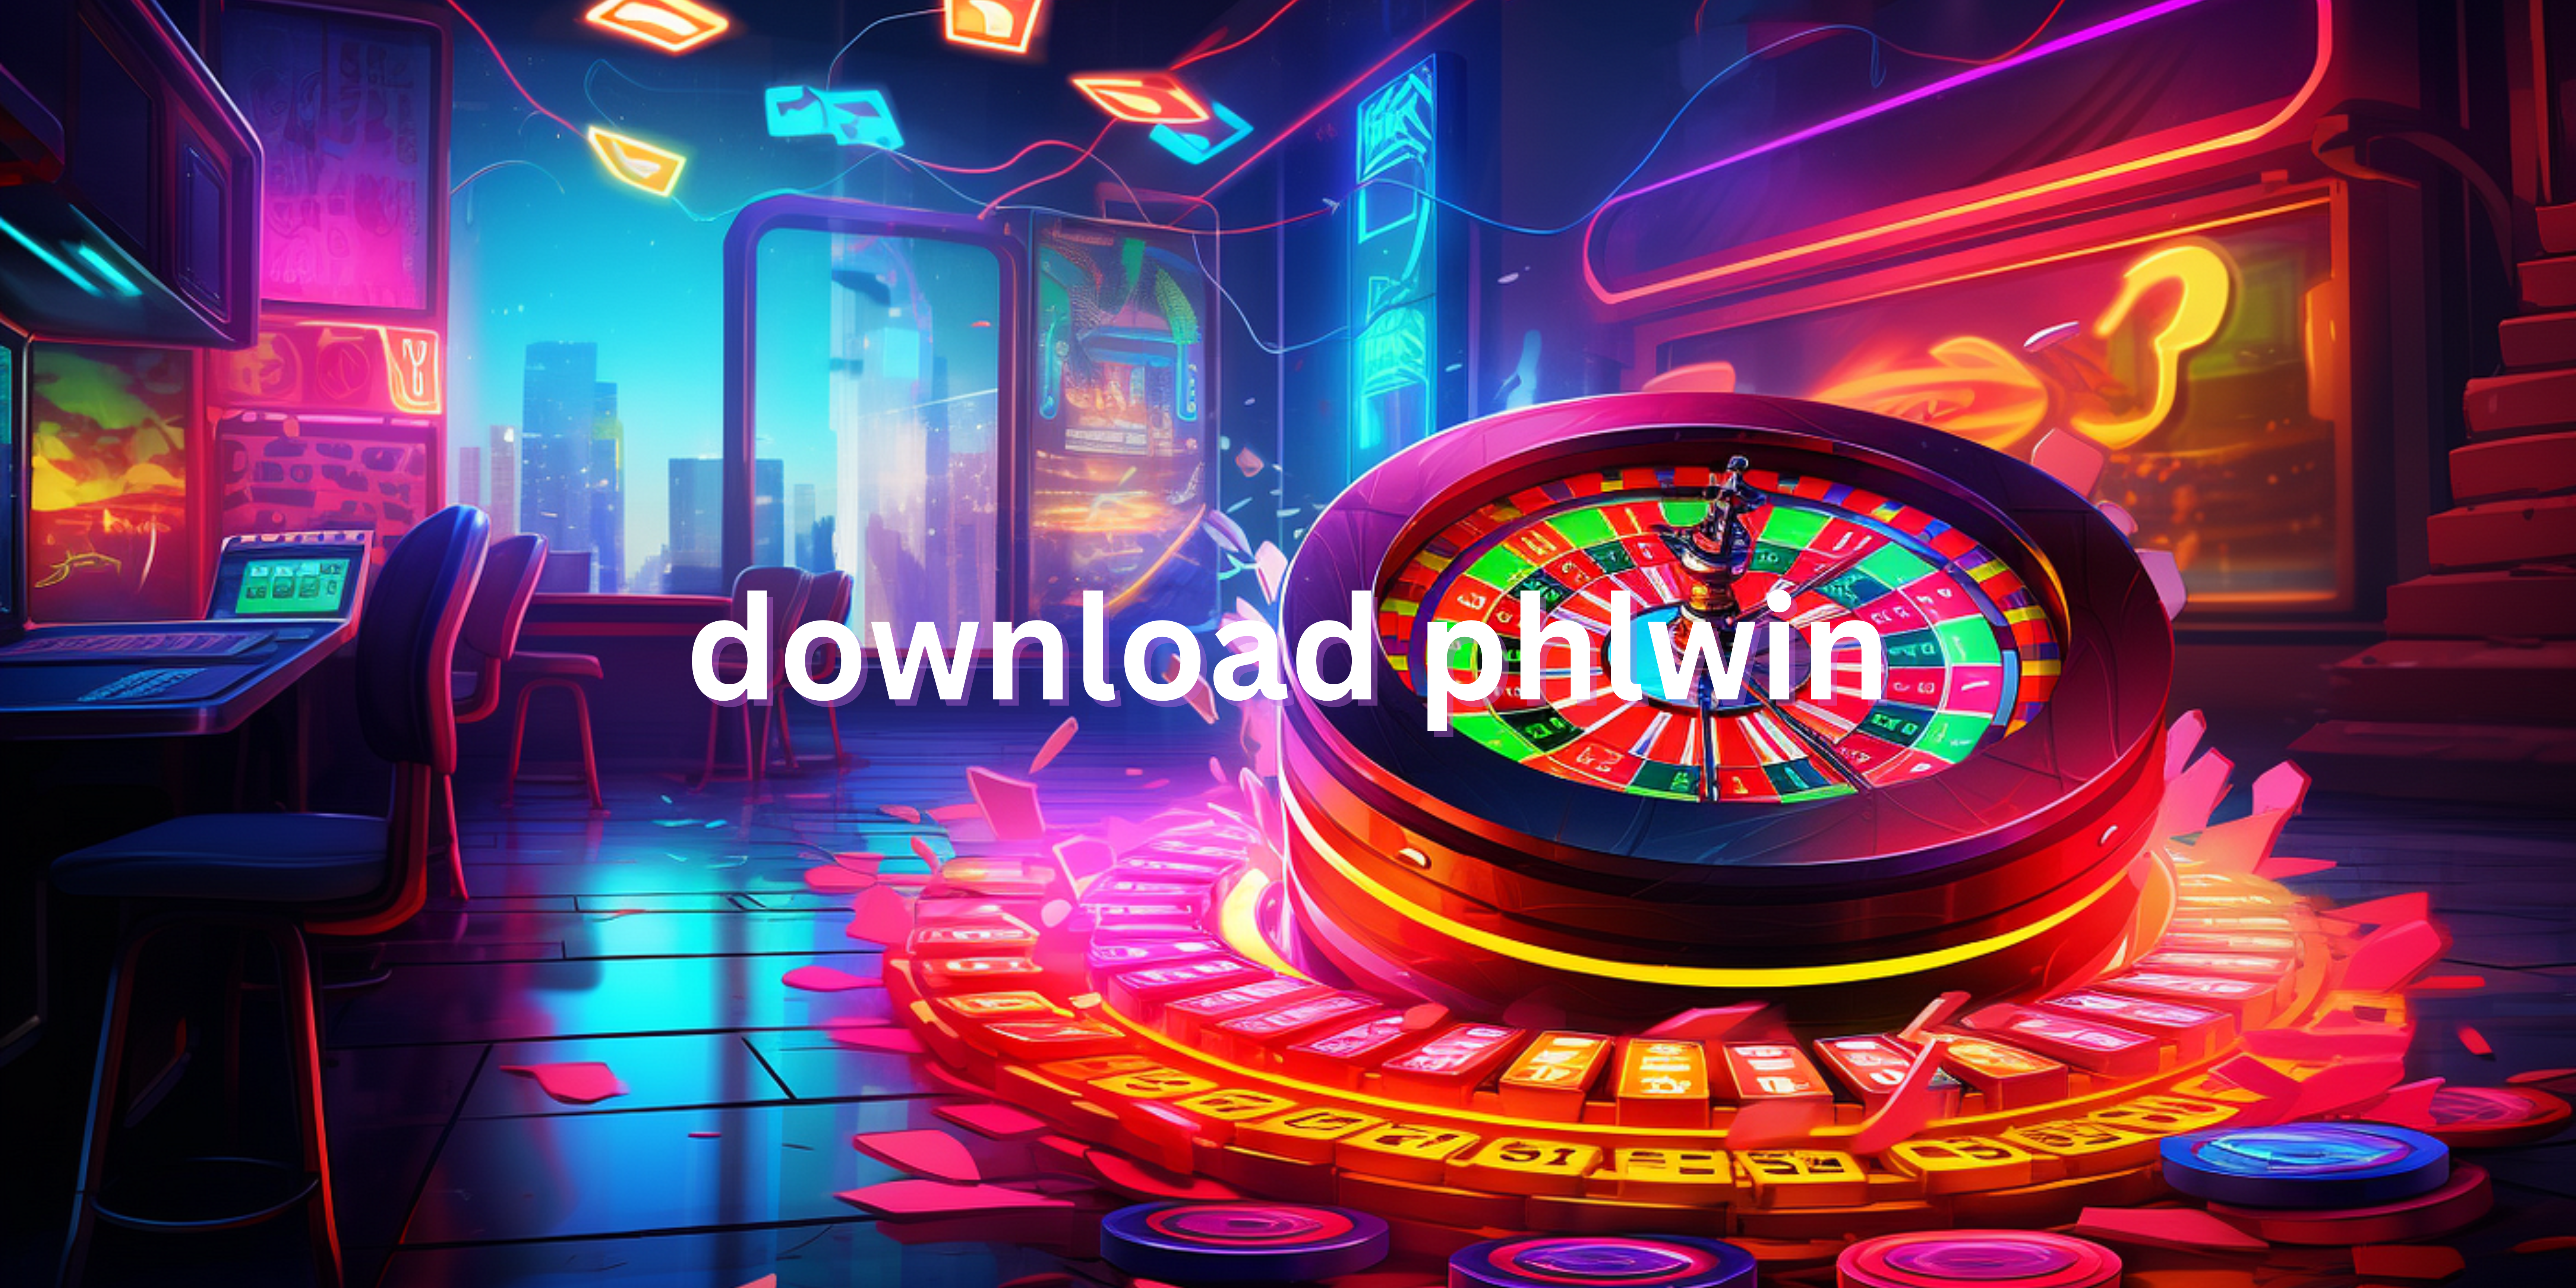 download phlwin